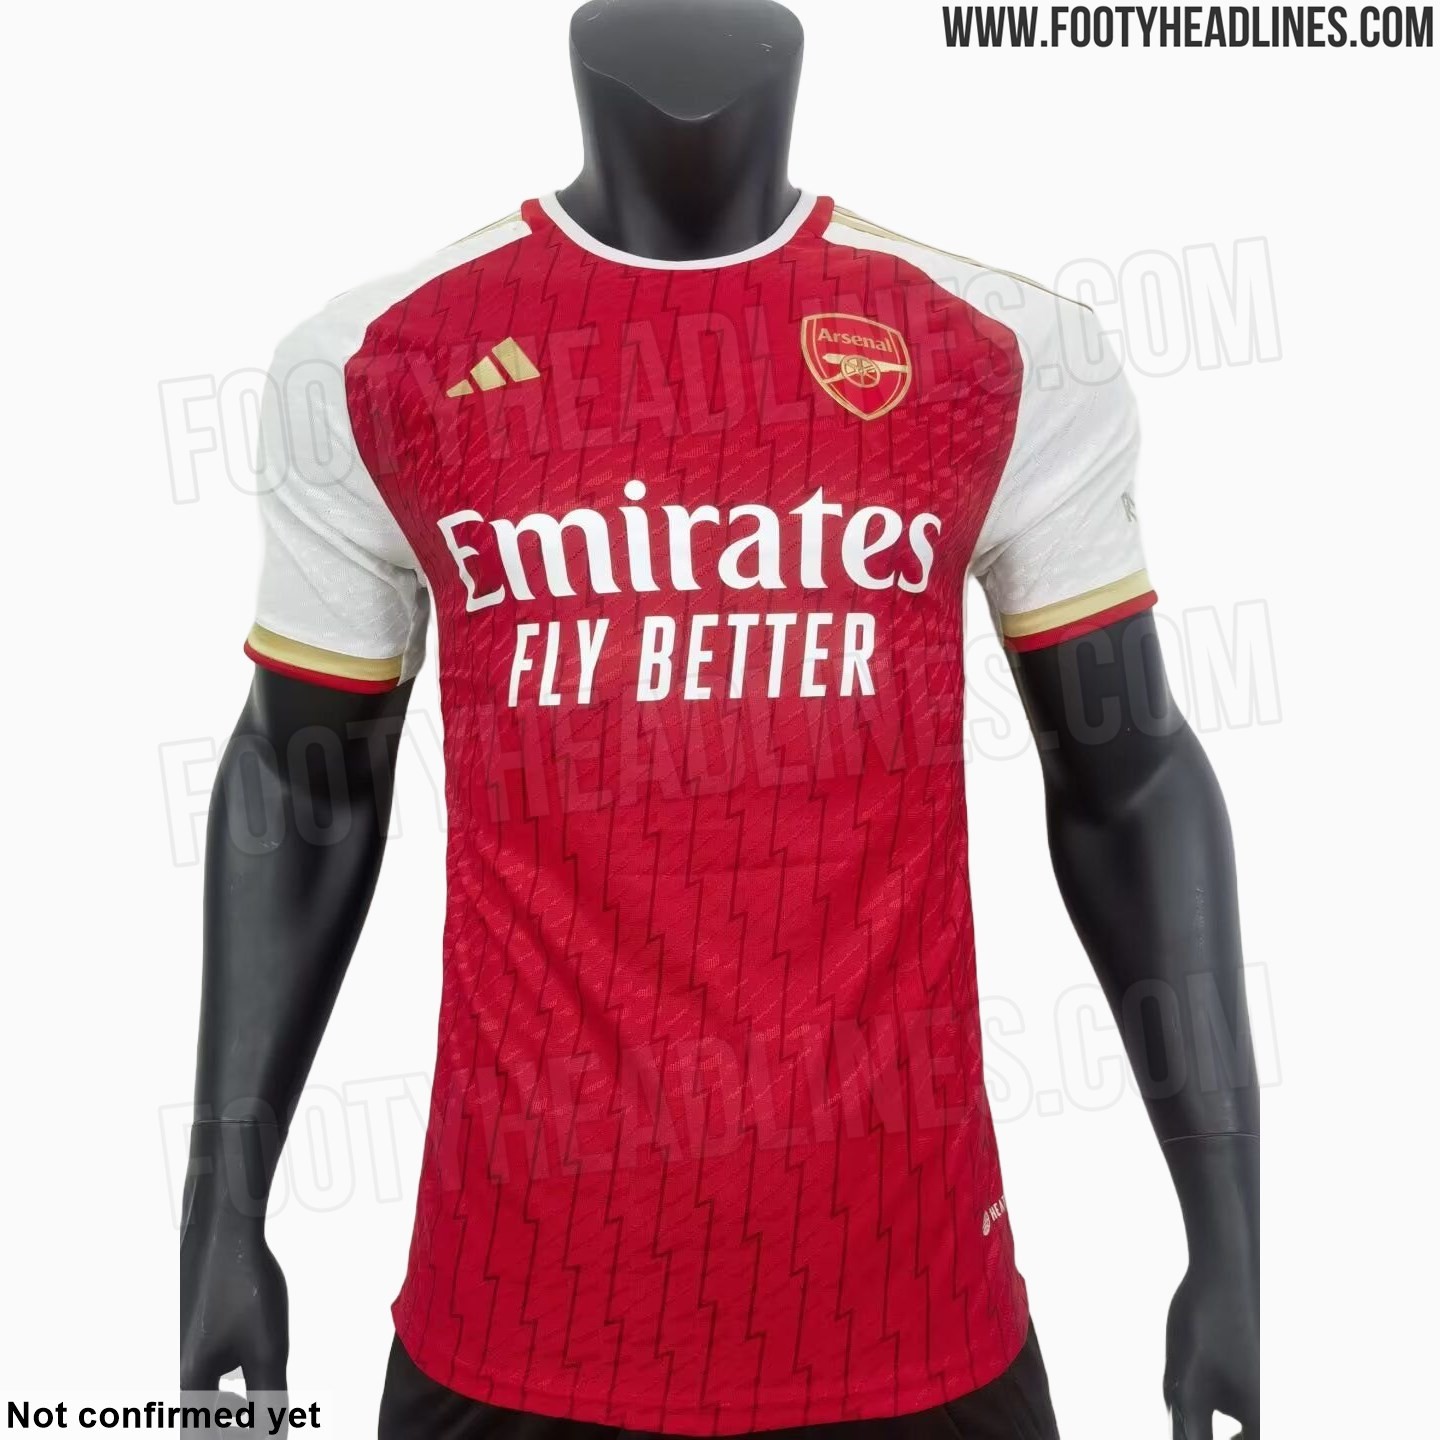 Arsenal to officially release new home kit this week